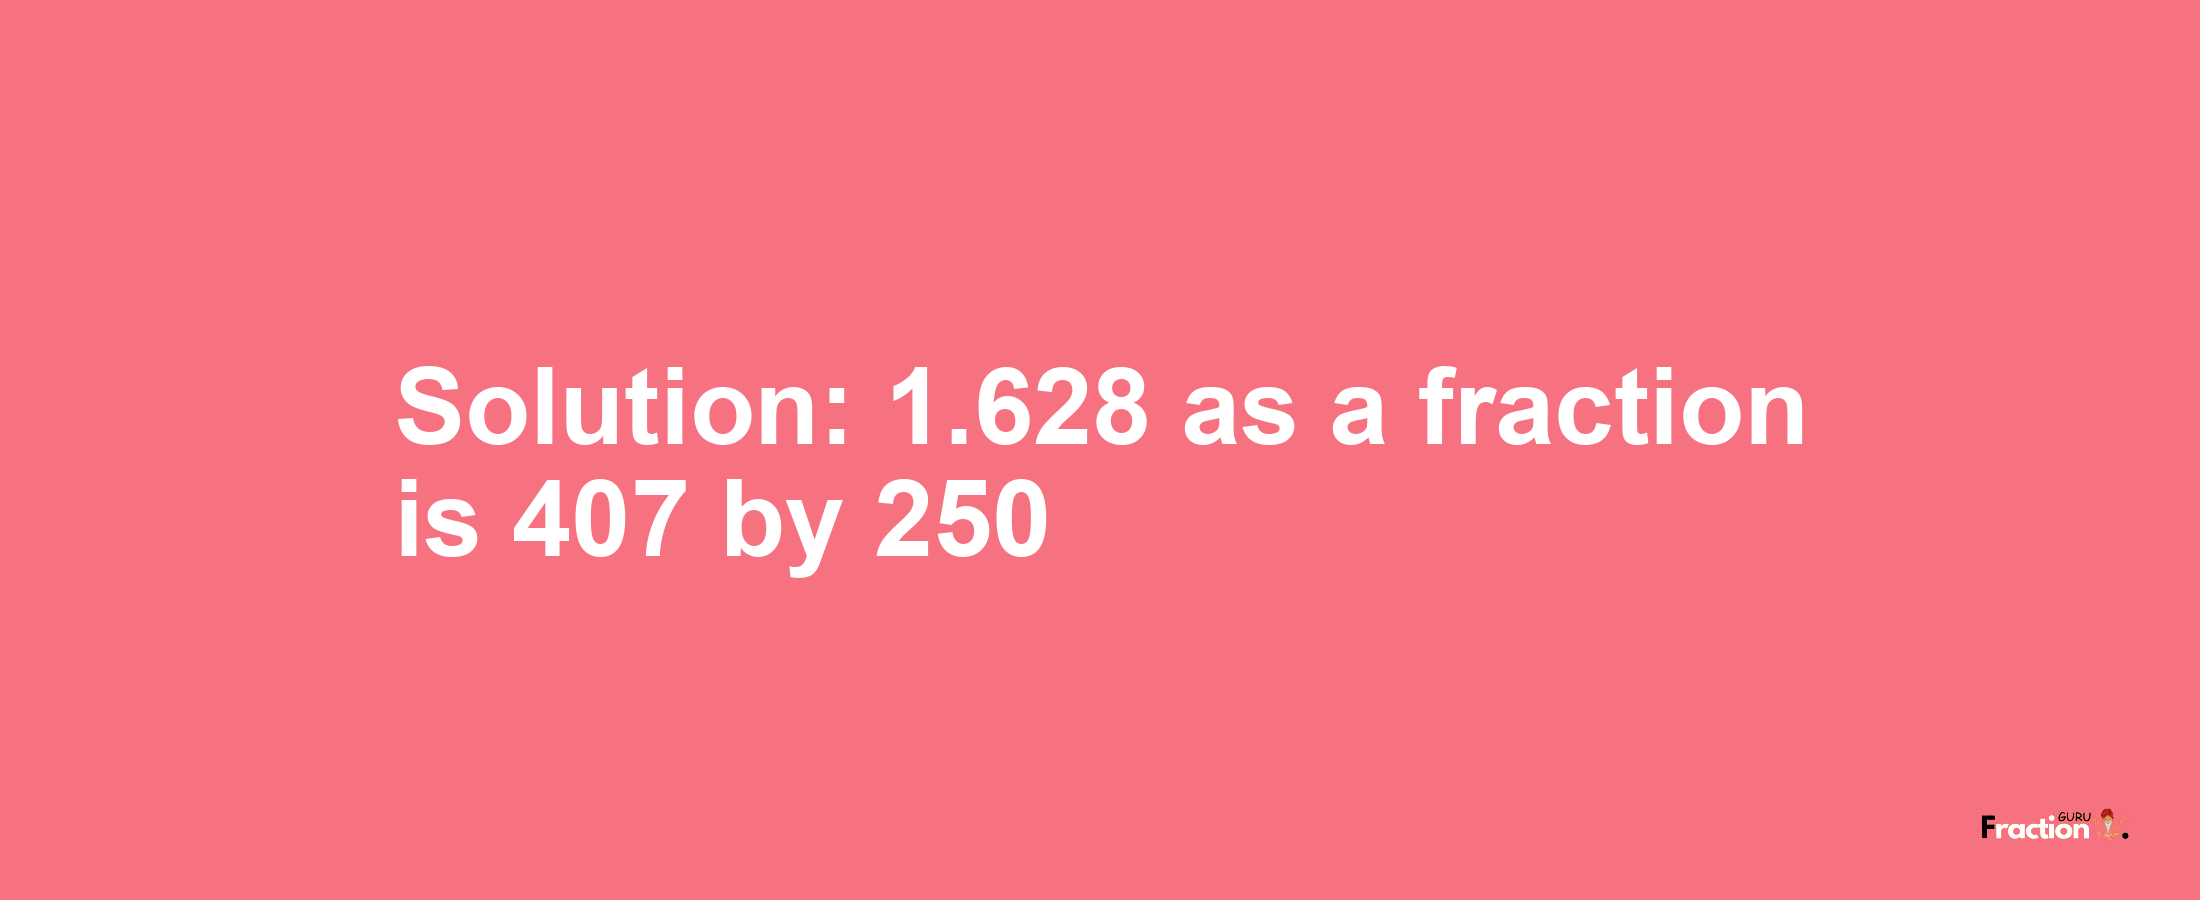 Solution:1.628 as a fraction is 407/250